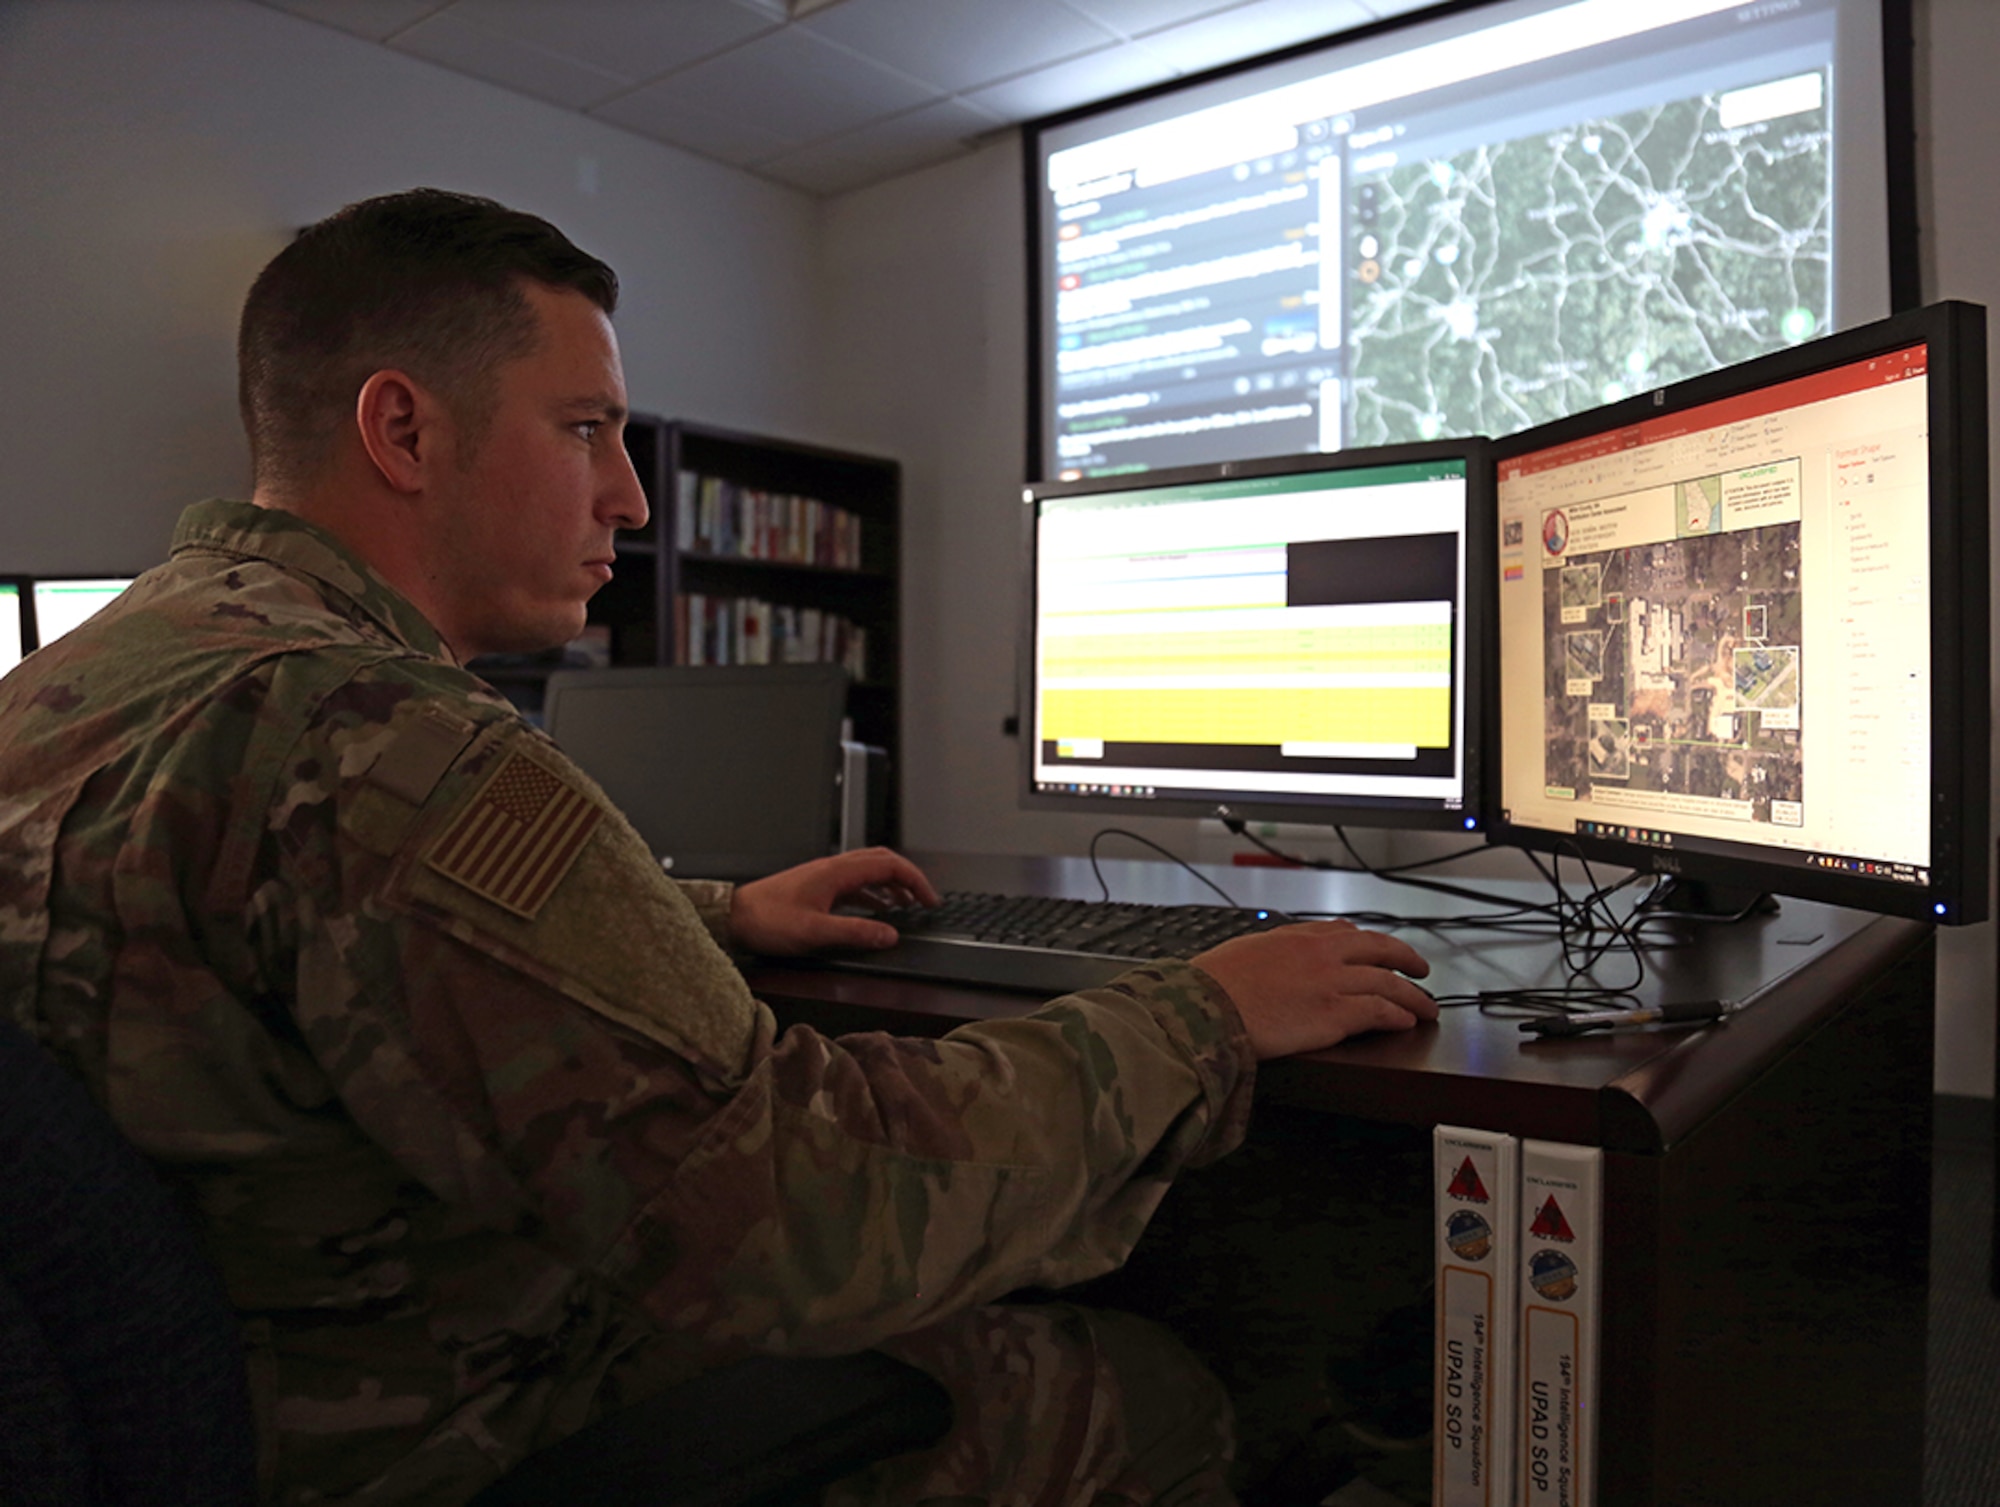 Senior Airman Jeffrey Andrews, a geospatial targeting analyst with the 194th Intelligence Squadron assigned to the Washington Air National Guard, looks at imagery of a Federal Emergency Management Agency (FEMA) distribution center Oct. 14, 2018 at Camp Murray, Wash.